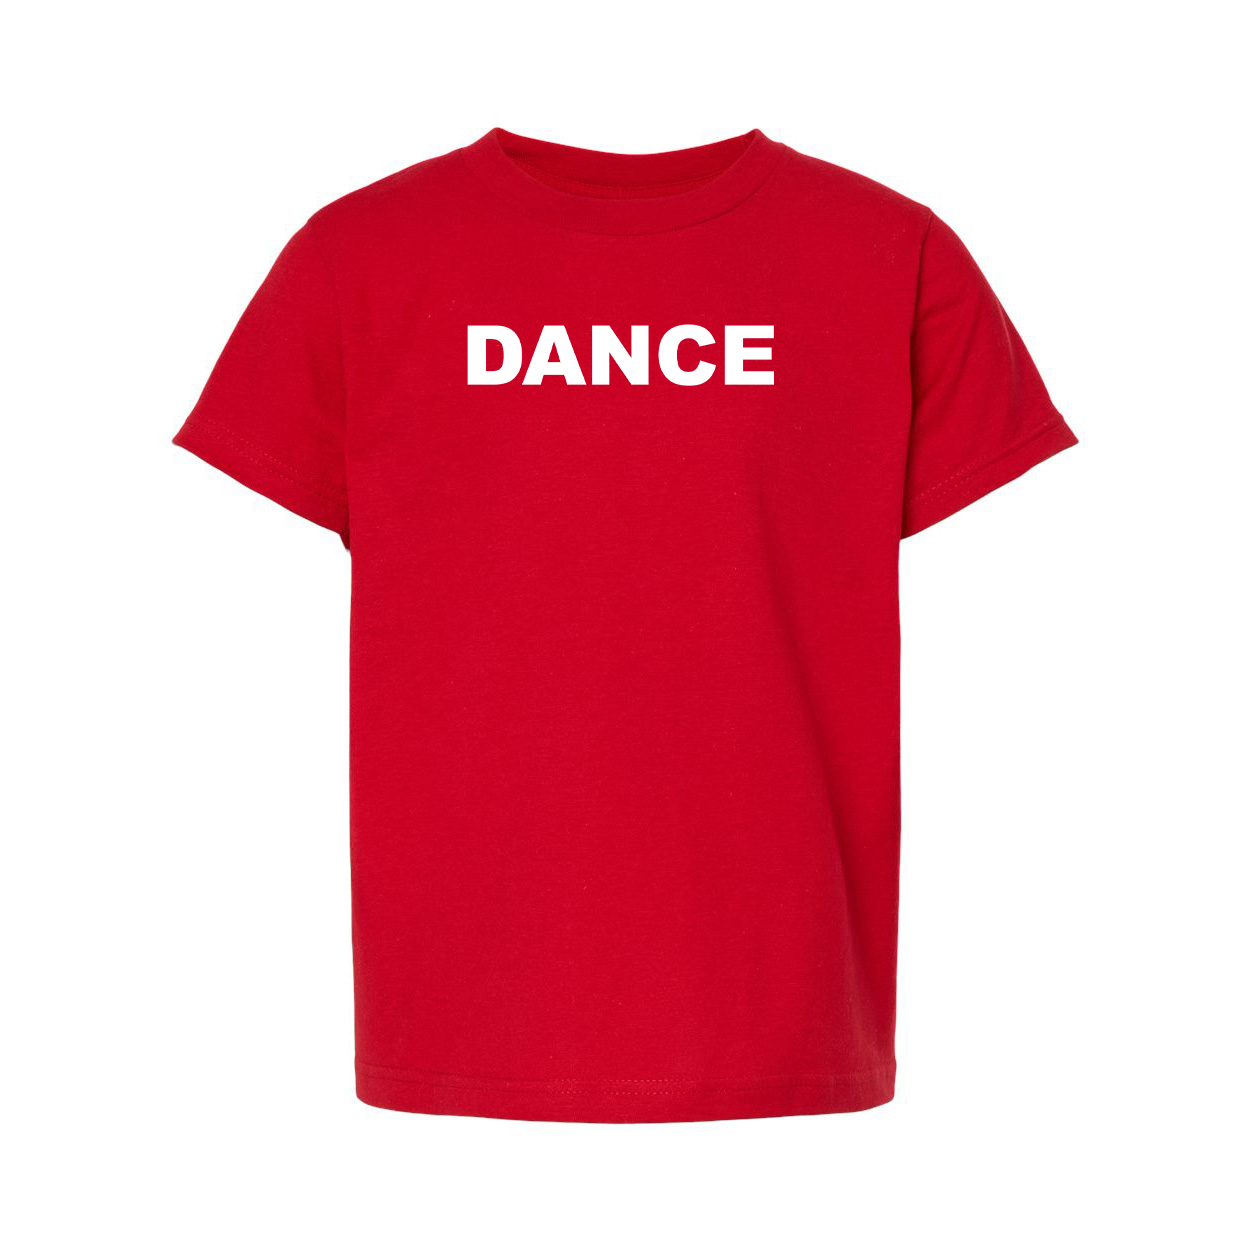 Dance Brand Logo Classic Youth Unisex T-Shirt Red 